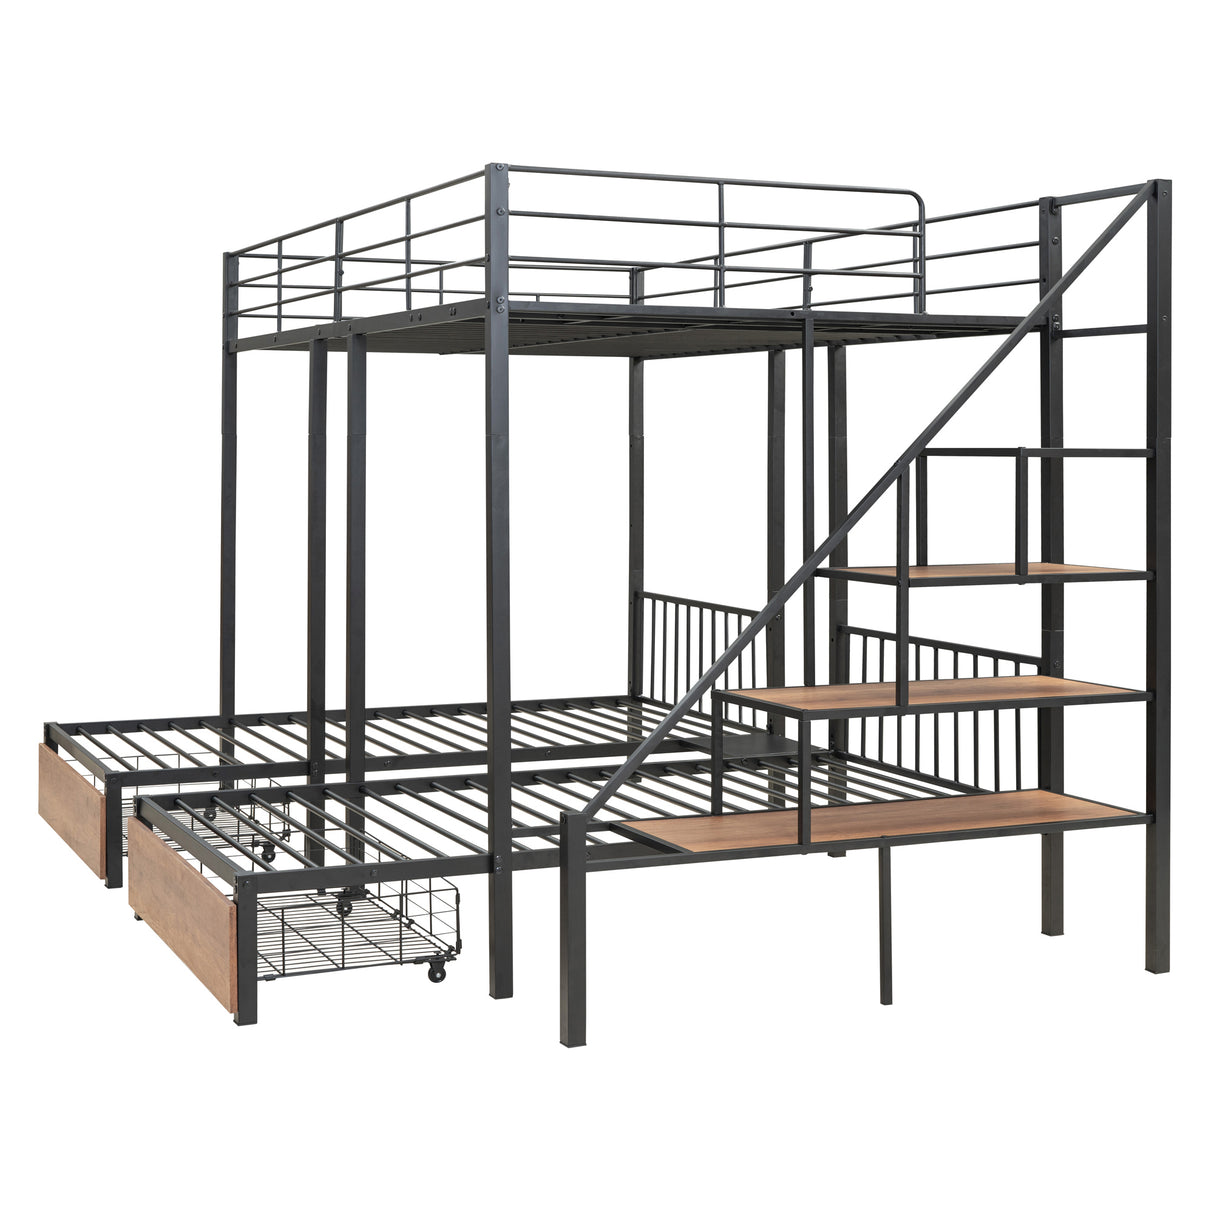 Full over Twin-Twin Triple bunk bed with drawers and staircase, Black